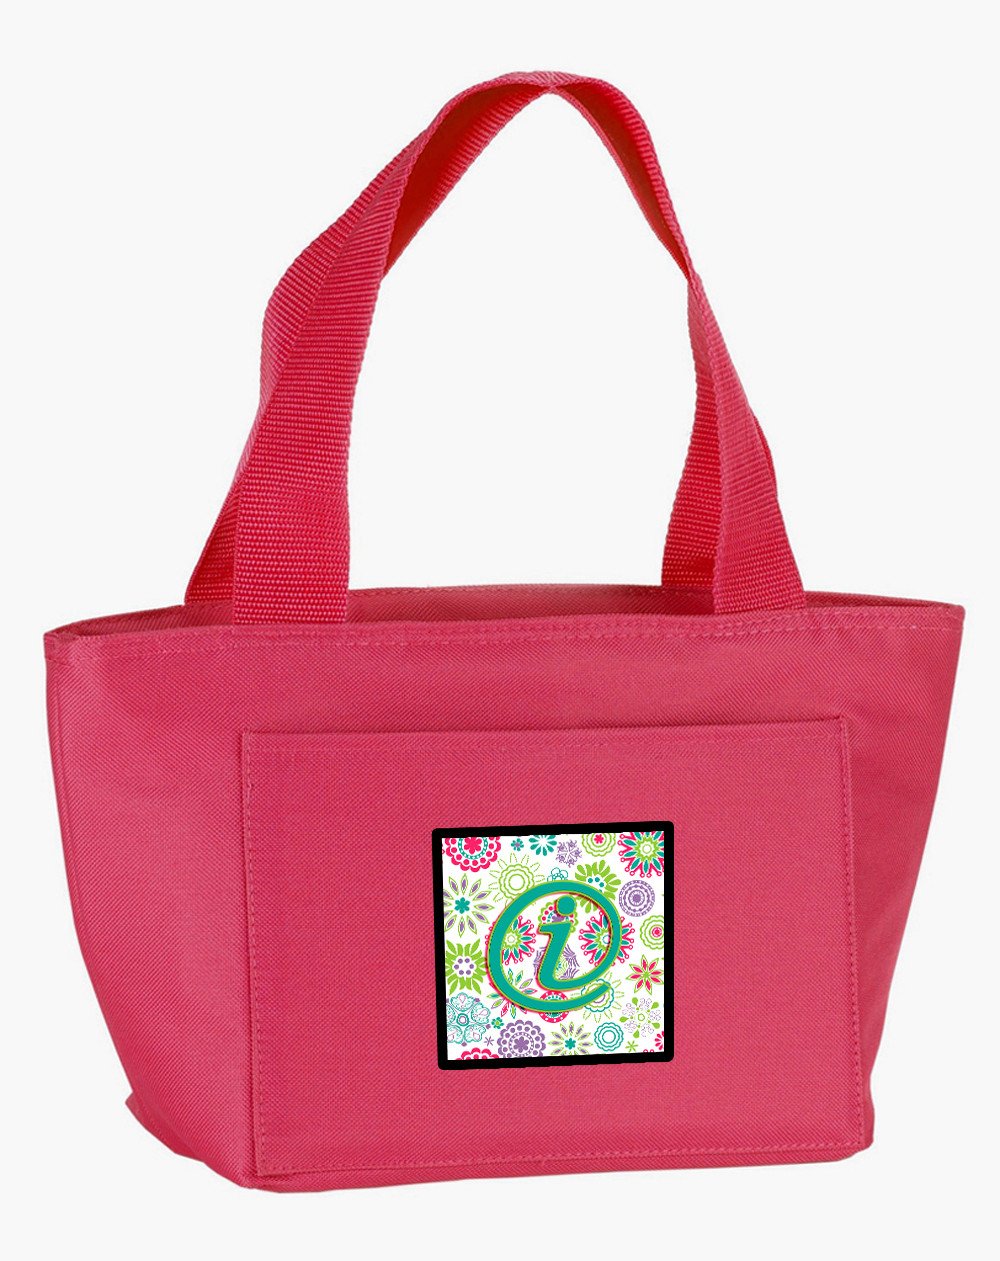 Letter I Flowers Pink Teal Green Initial Lunch Bag CJ2011-IPK-8808 by Caroline's Treasures